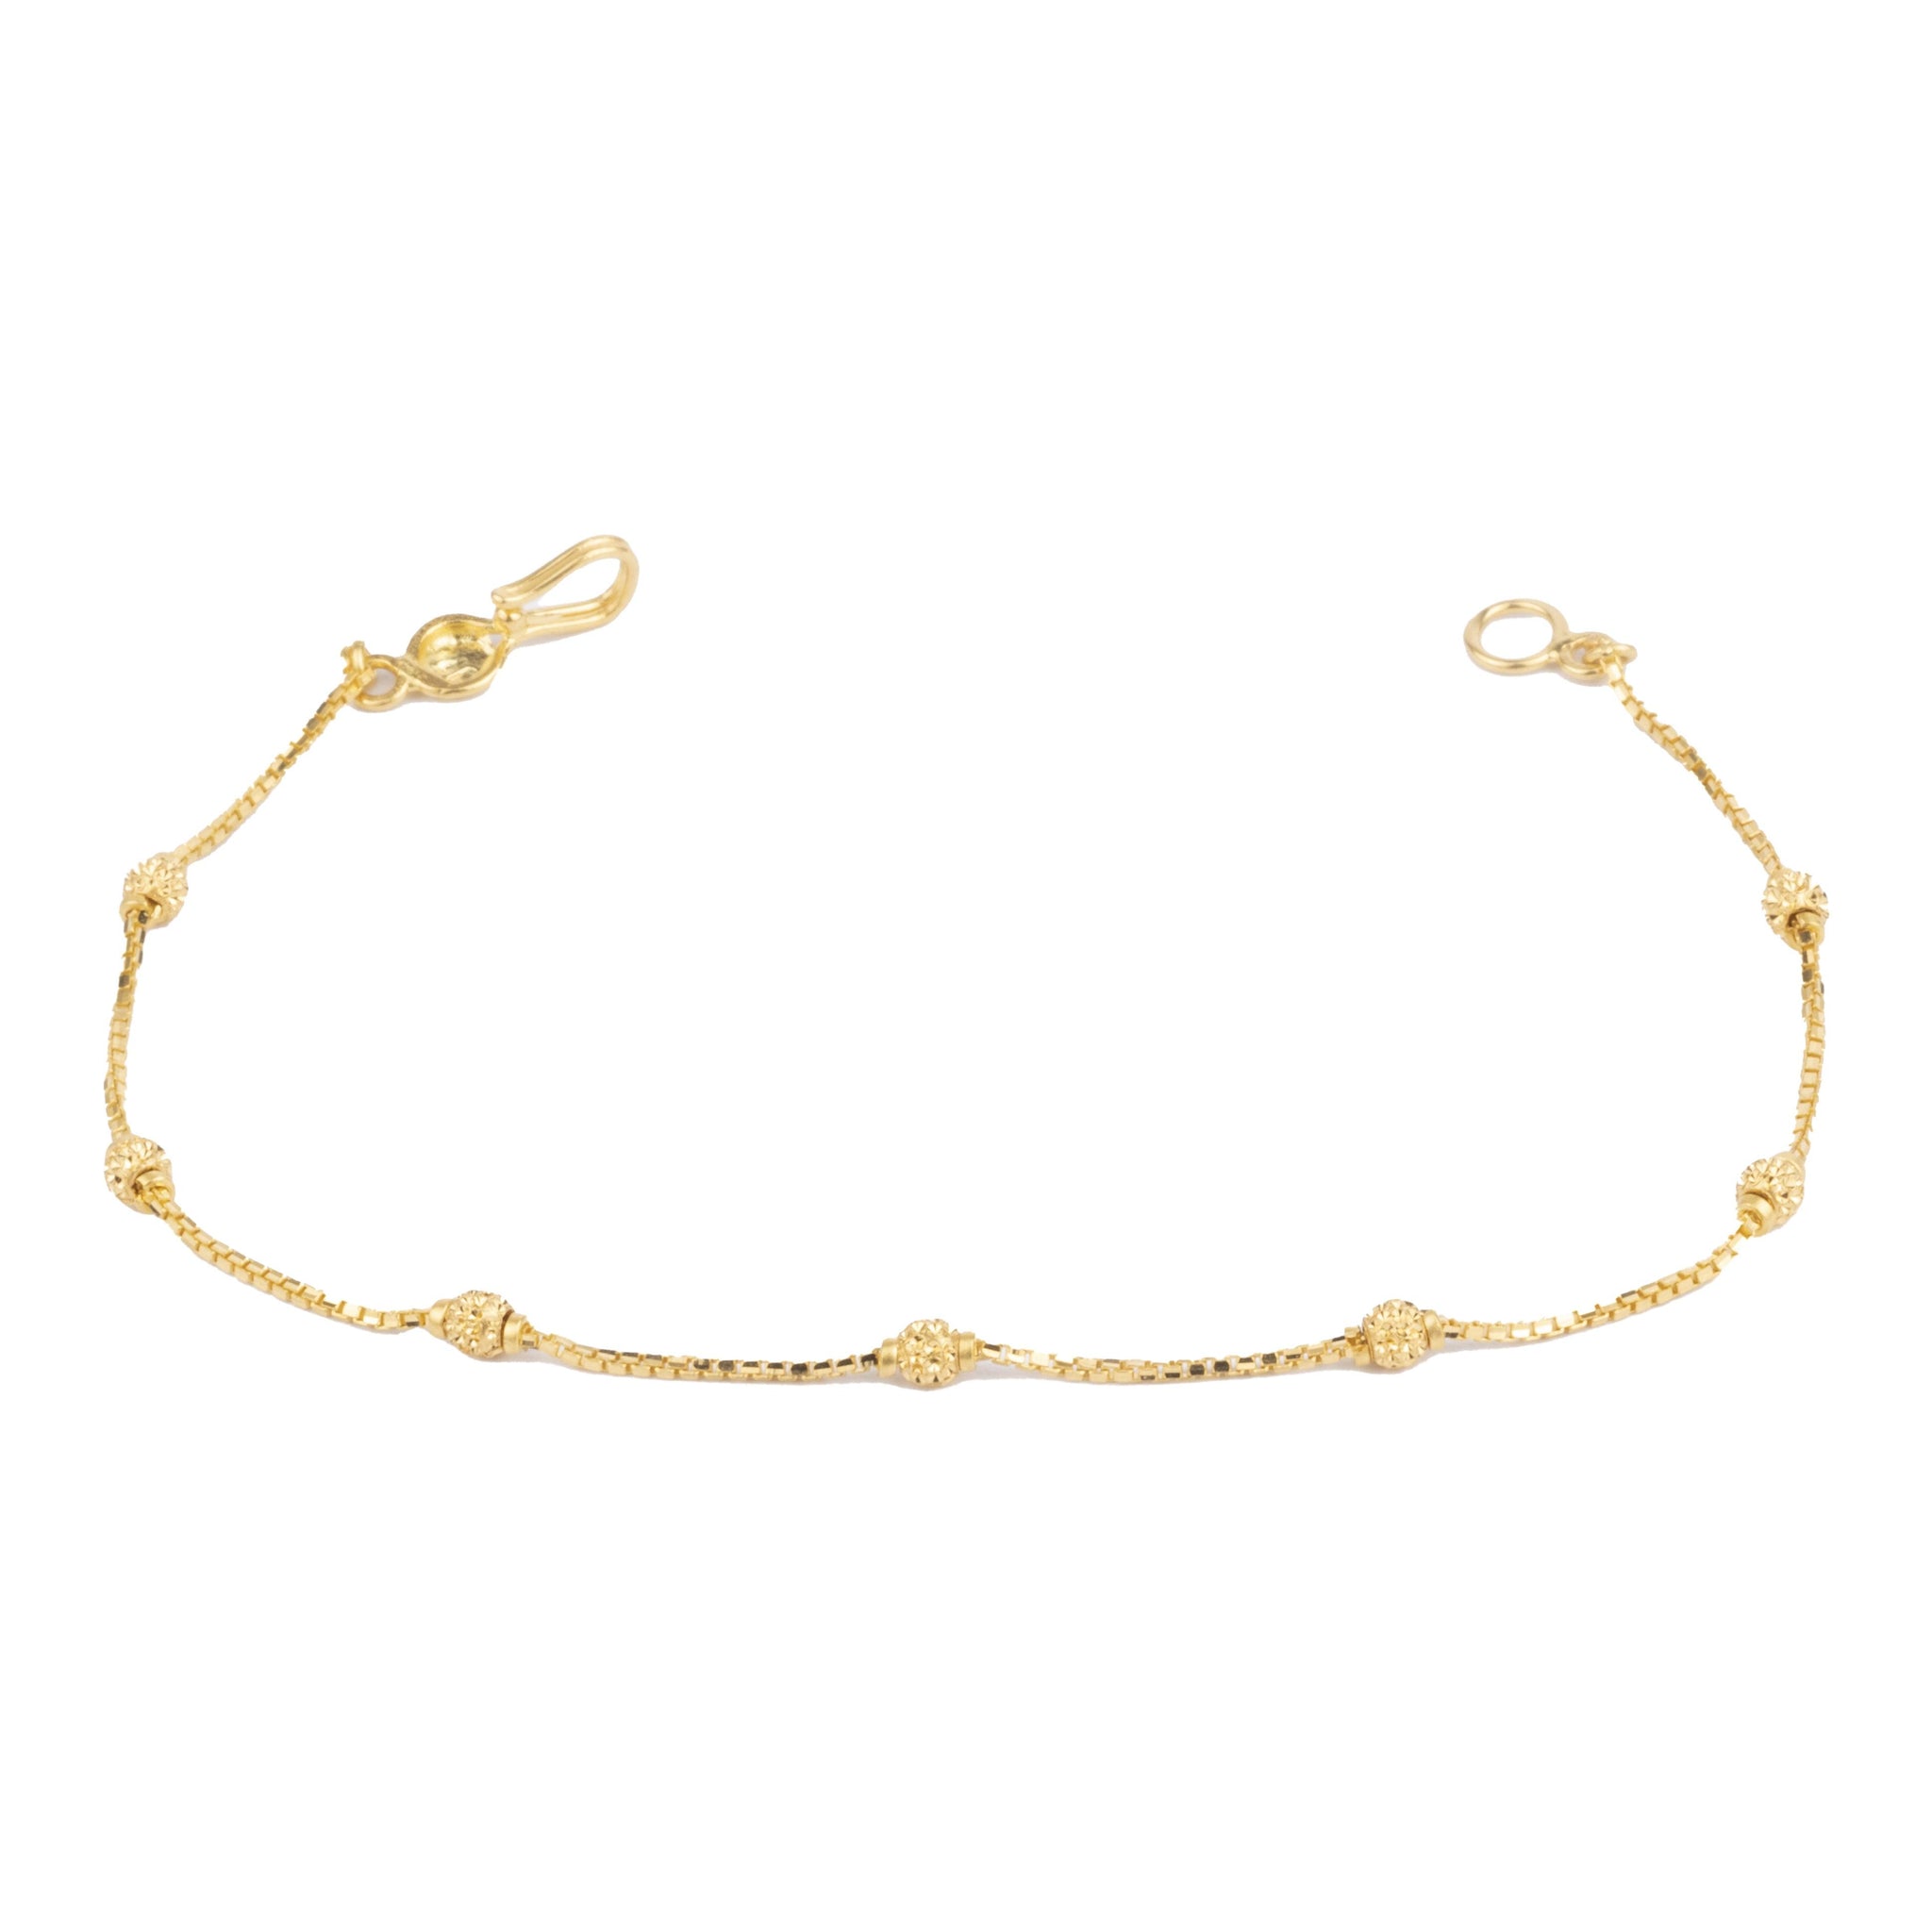 22ct Gold Box Chain Bracelet with Diamond Cut Beads and Hook Clasp LBR-7125